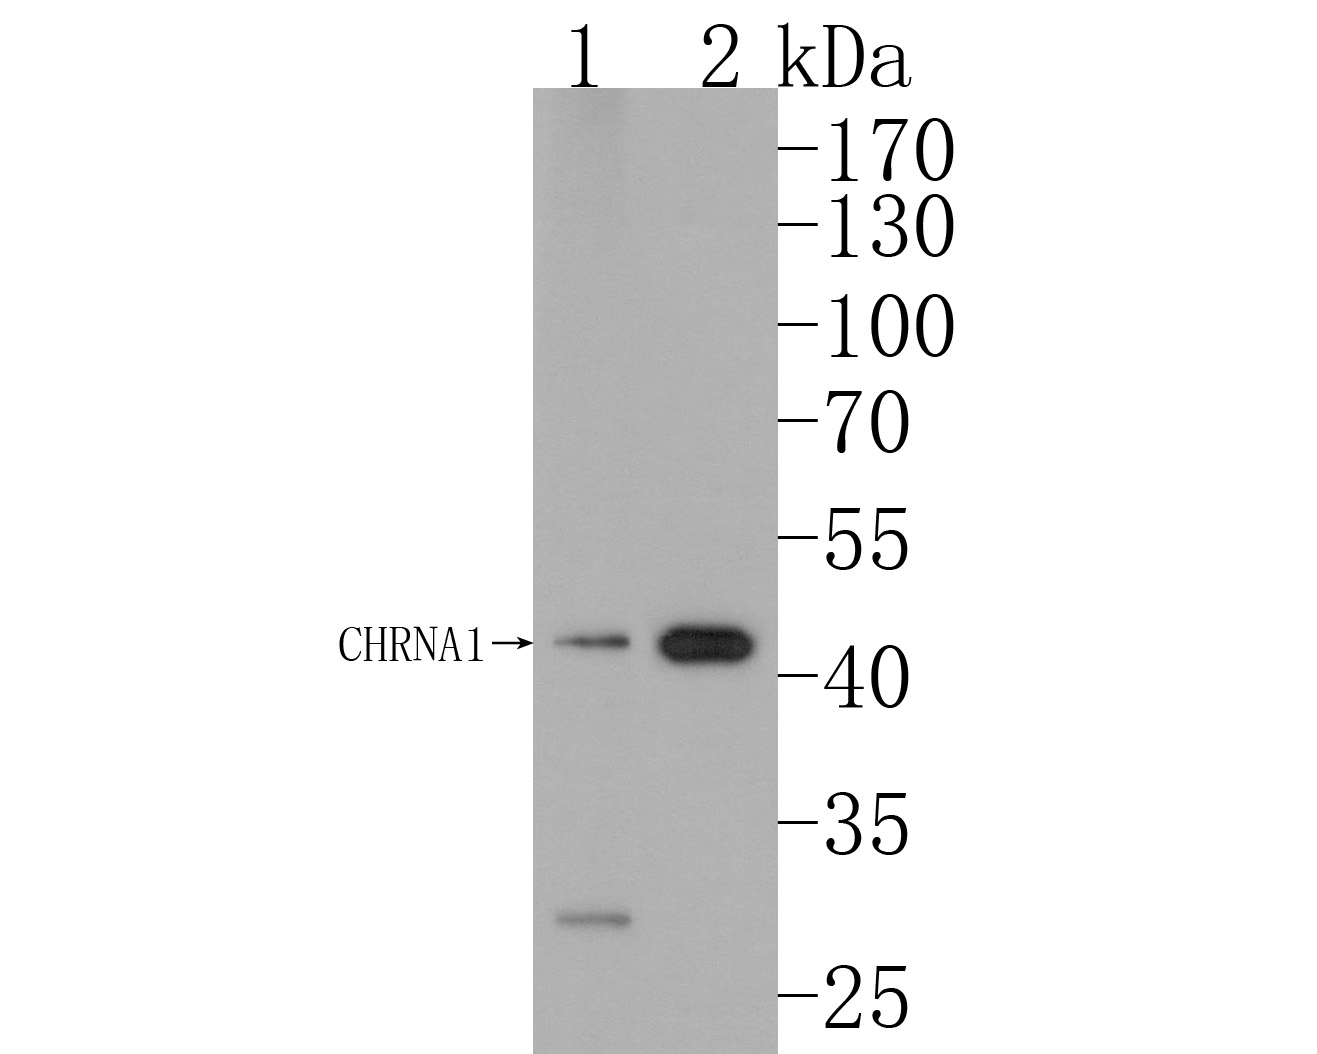 Western blot analysis of CHRNA1 on different lysates. Proteins were transferred to a PVDF membrane and blocked with 5% BSA in PBS for 1 hour at room temperature. The primary antibody (ER1902-58, 1/500) was used in 5% BSA at room temperature for 2 hours. Goat Anti-Rabbit IgG - HRP Secondary Antibody (HA1001) at 1:200,000 dilution was used for 1 hour at room temperature.<br />
Positive control: <br />
Lane 1: Rat heart tissue lysate<br />
Lane 2: Mouse heart tissue lysate